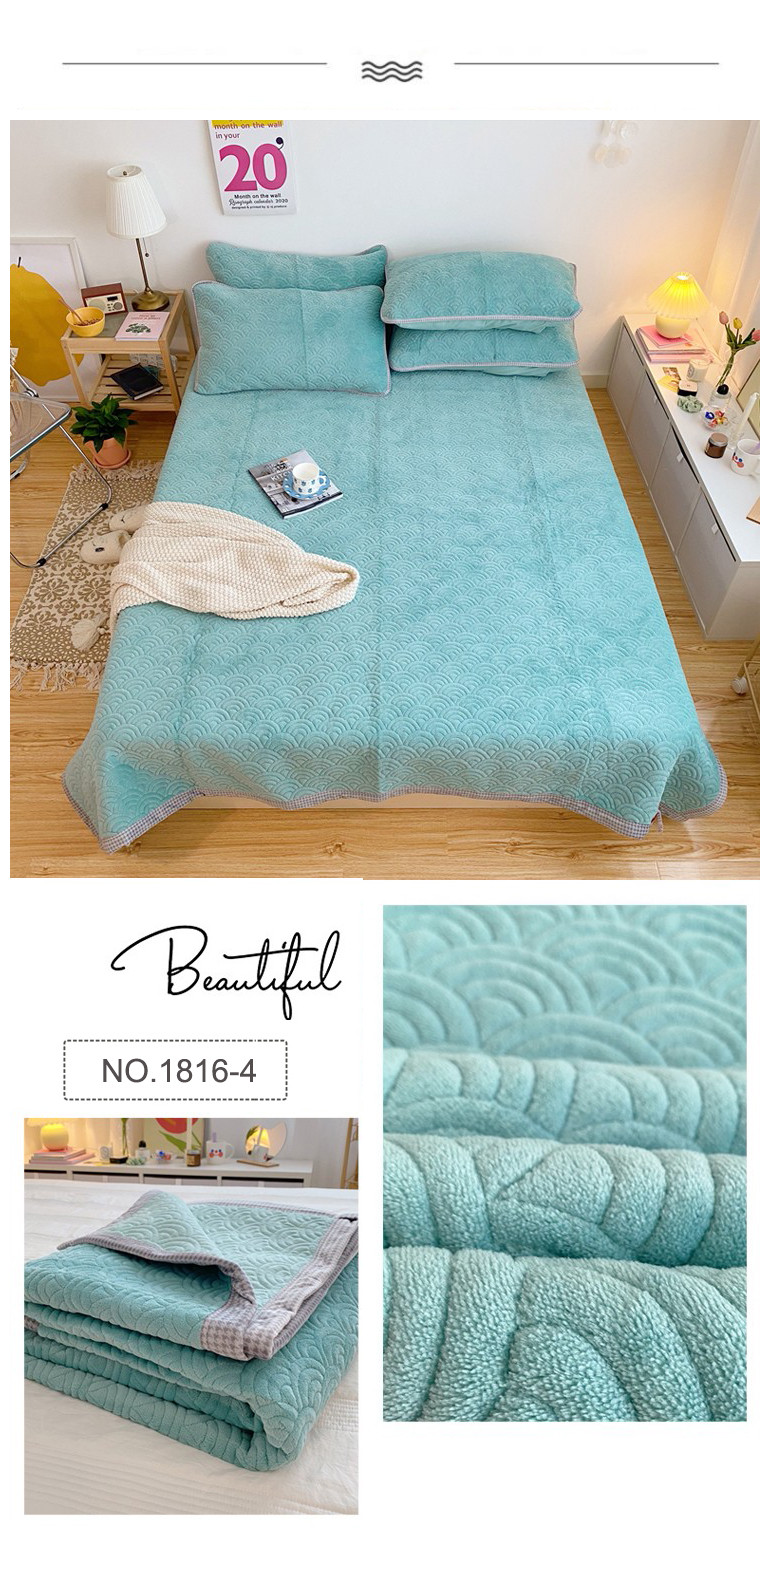 Queen Bed Turquoise blue Bedspread